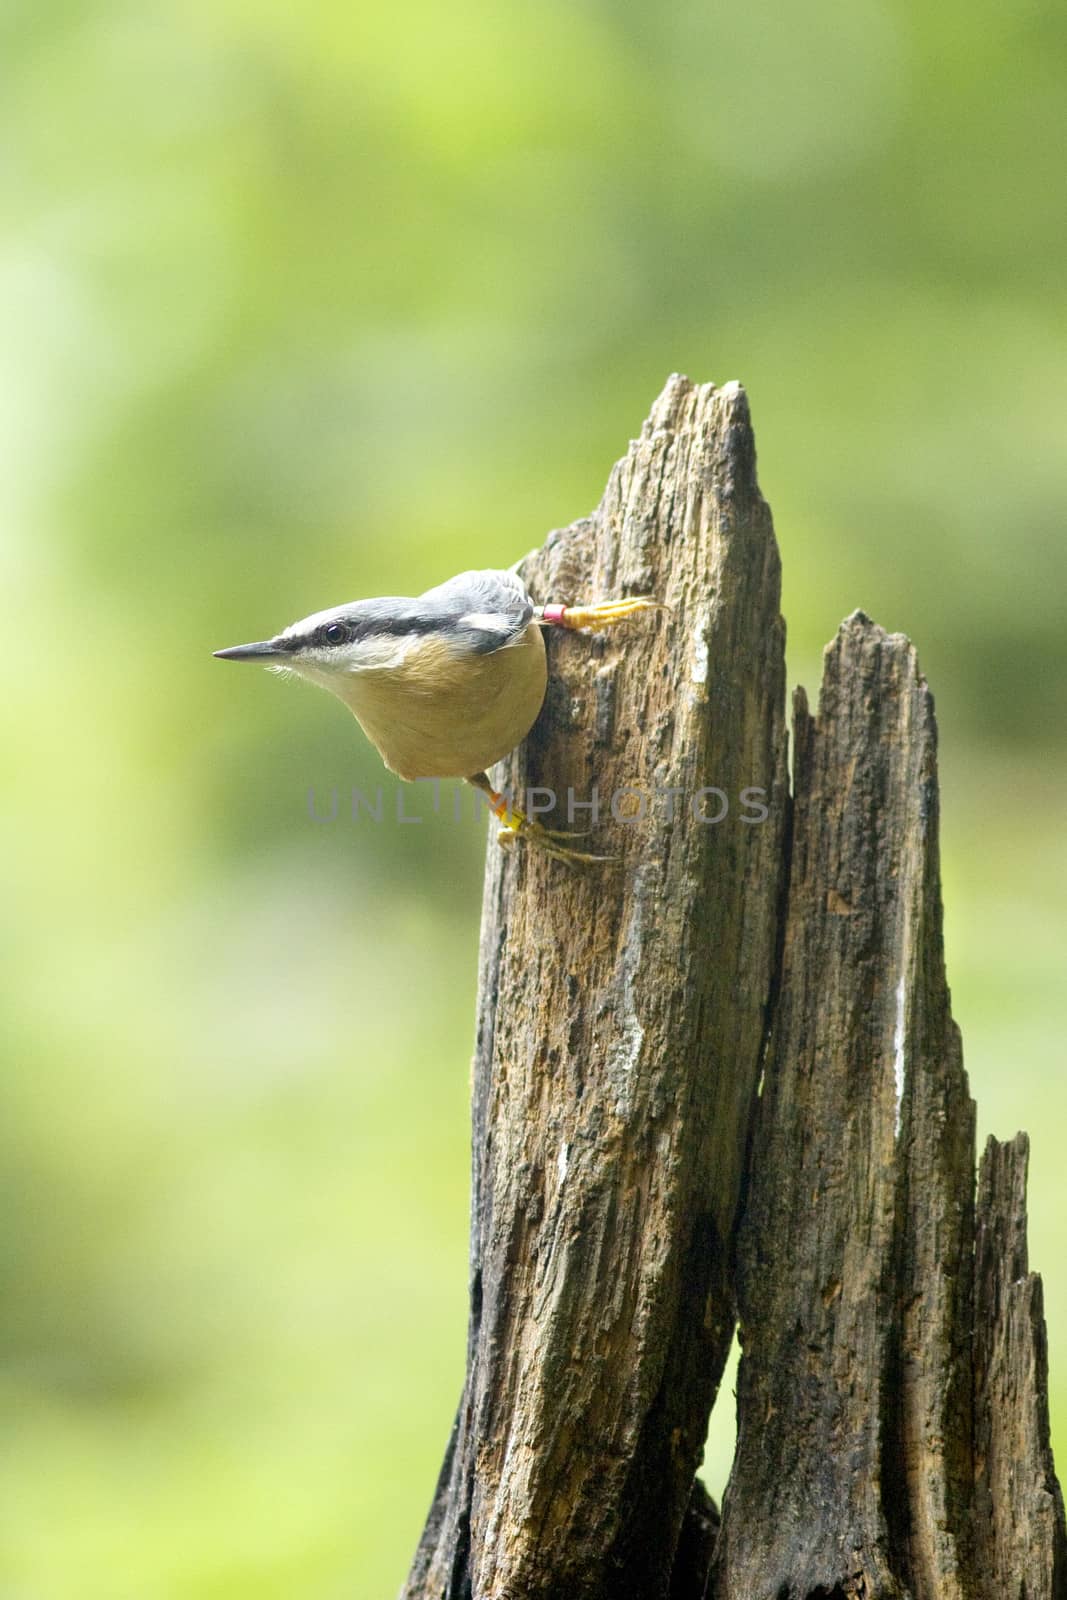 nuthatch on old tree stump against green background